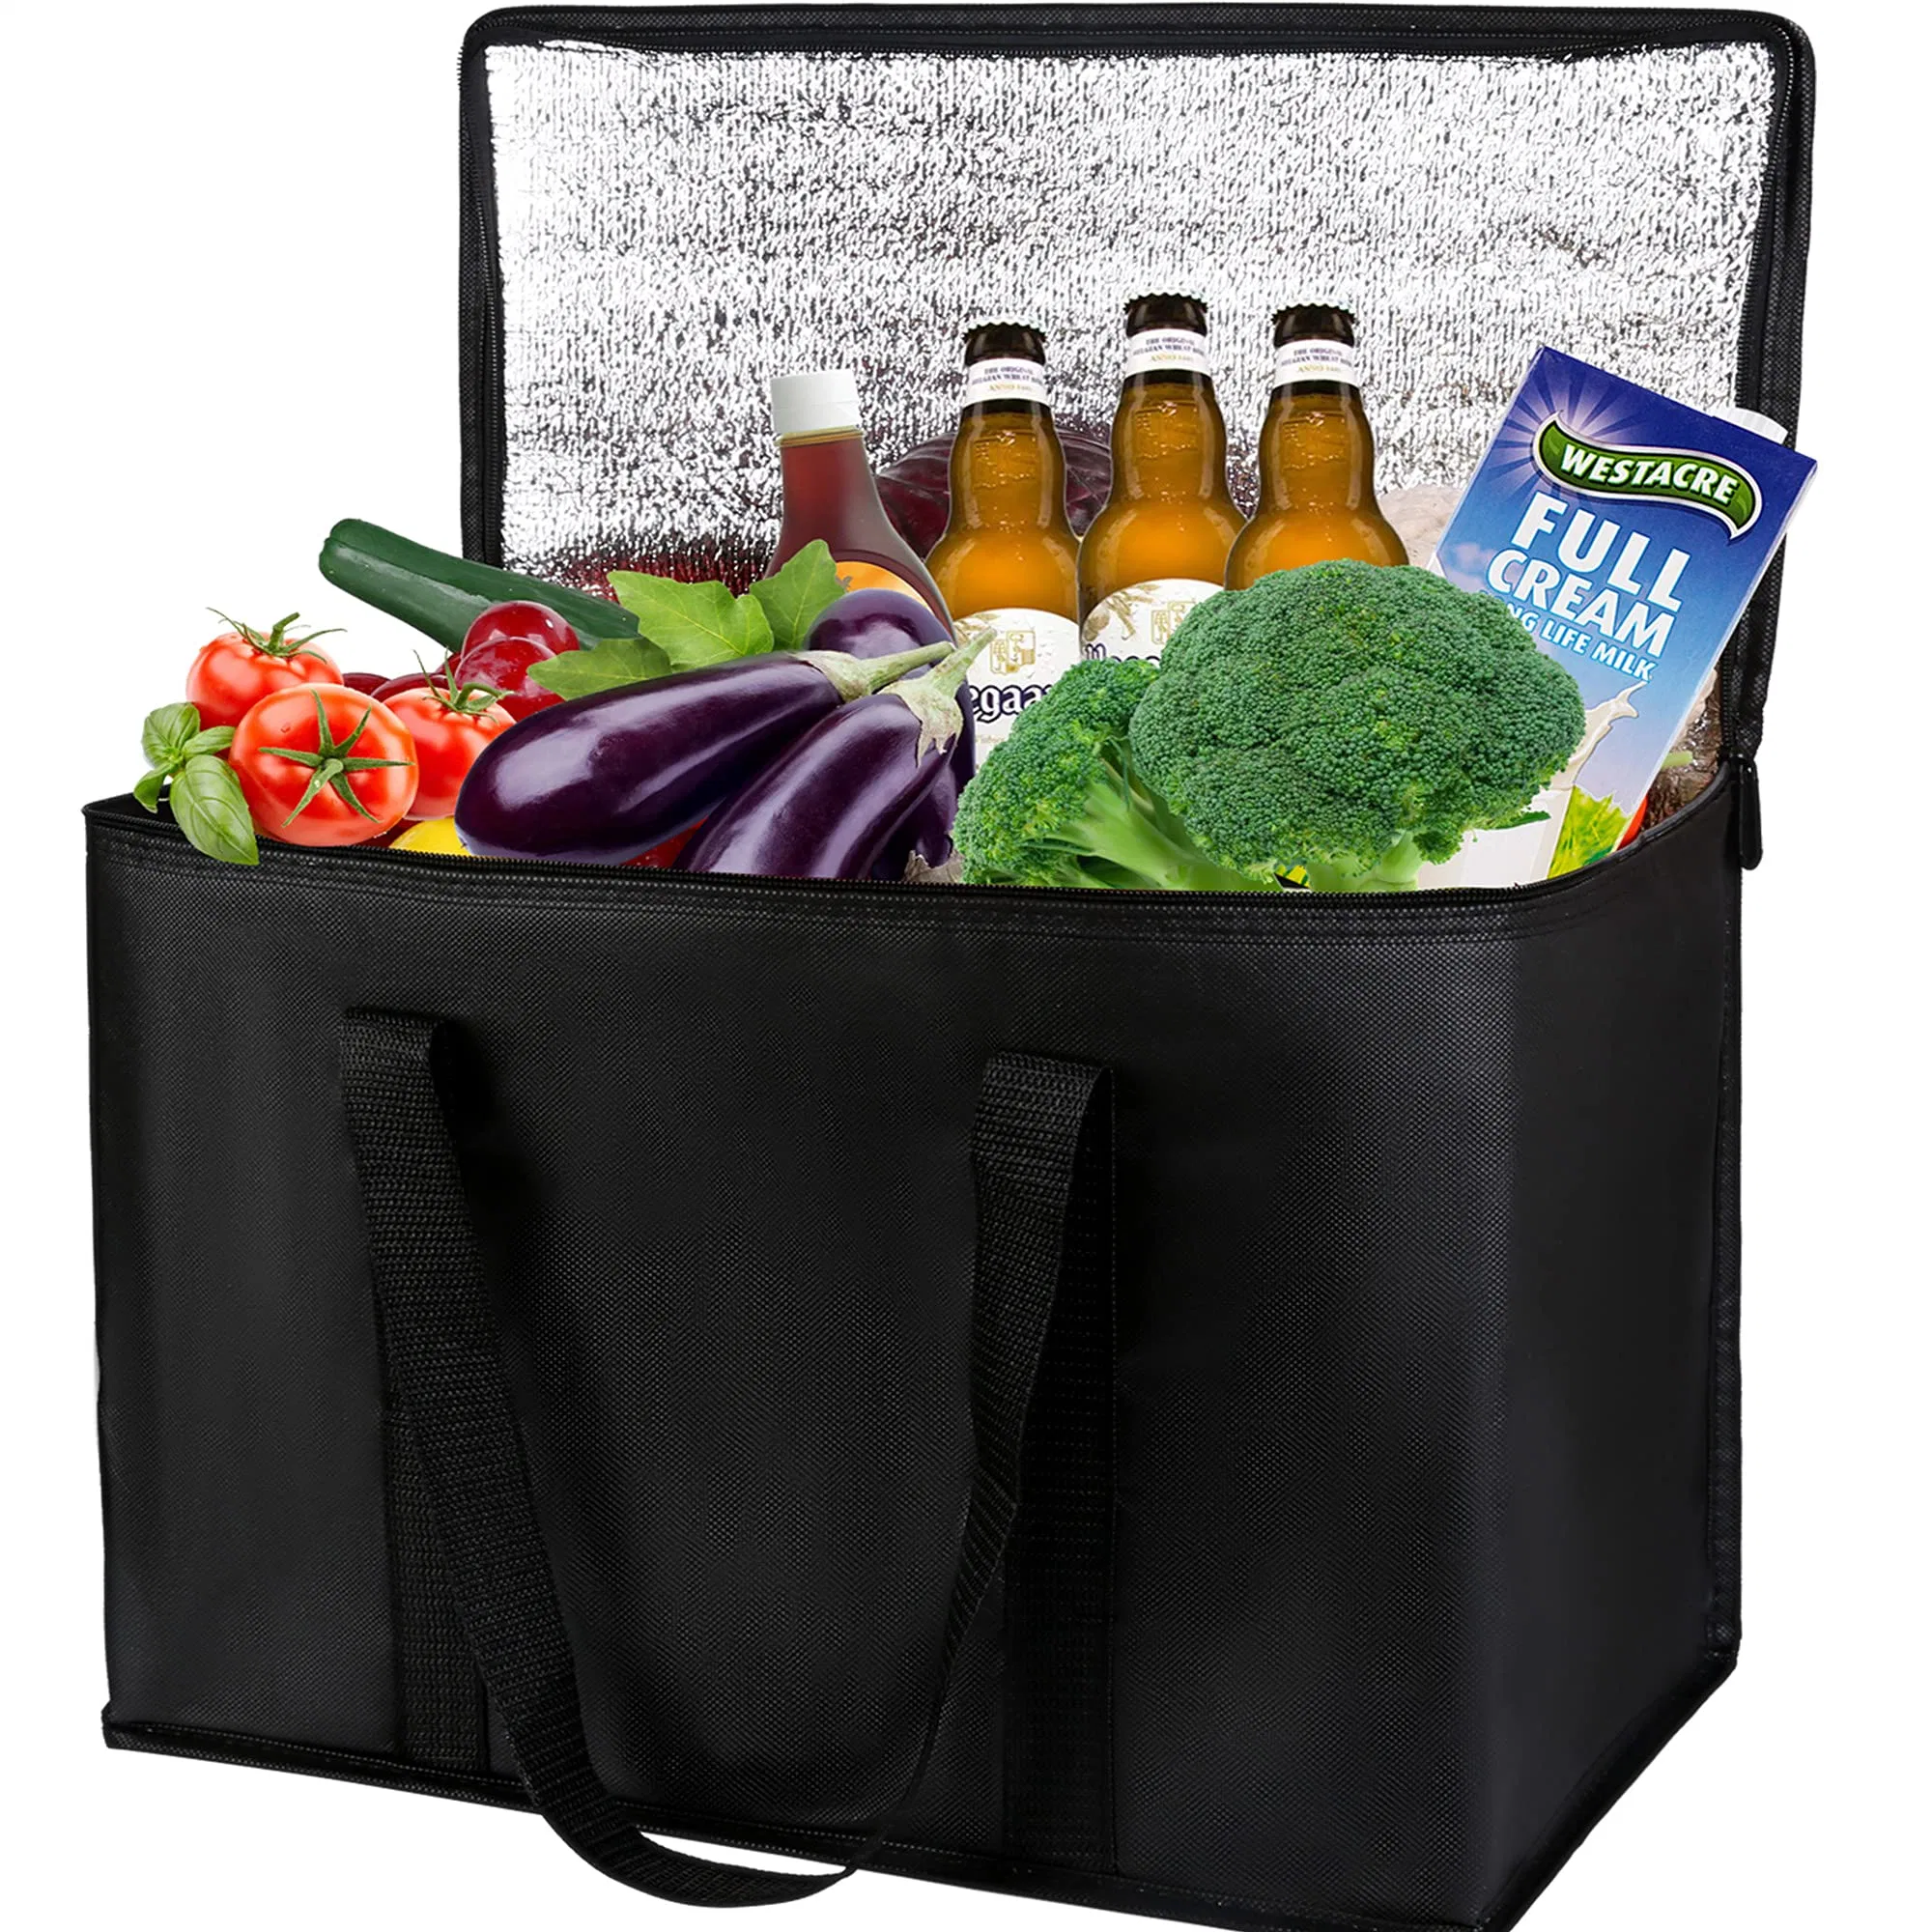 Insulated Grocery Shopping Bags, Reusable, Thermal Zipper, Collapsible, Tote, Cooler, Food Transport Hot and Cold